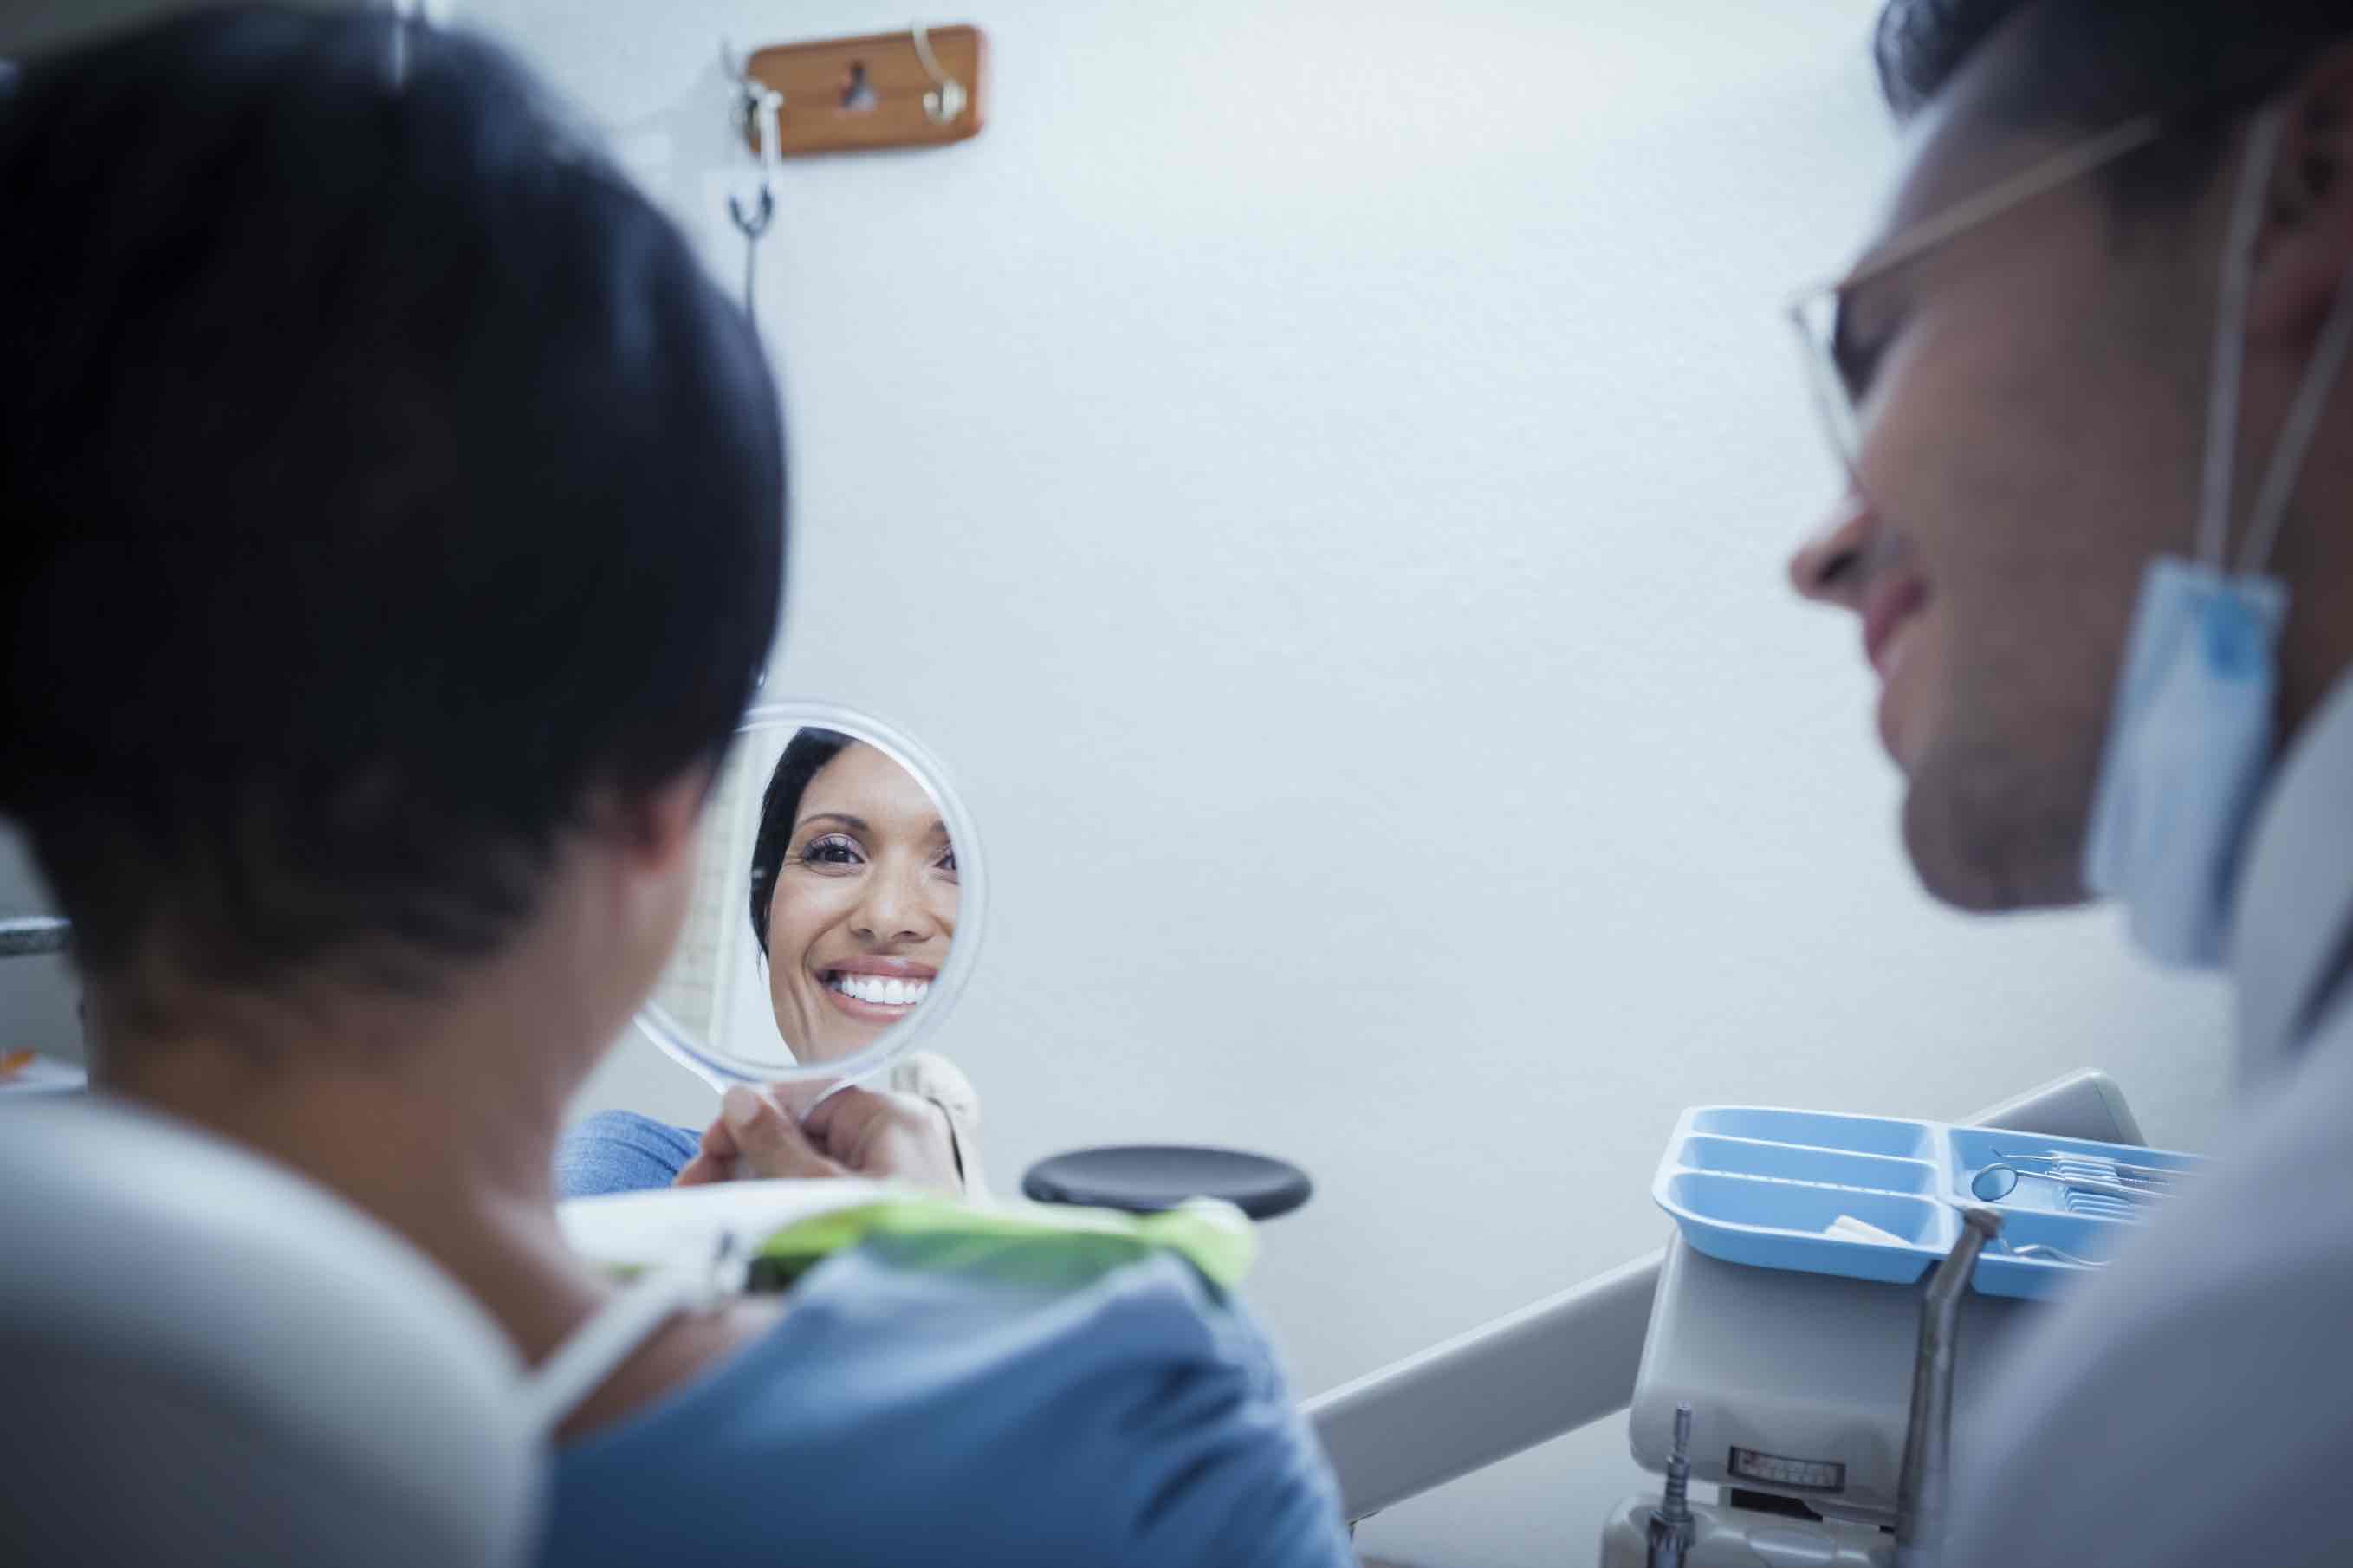 Dental coverage benefits everyone, even if you don’t have major dental issues! Here’s why: